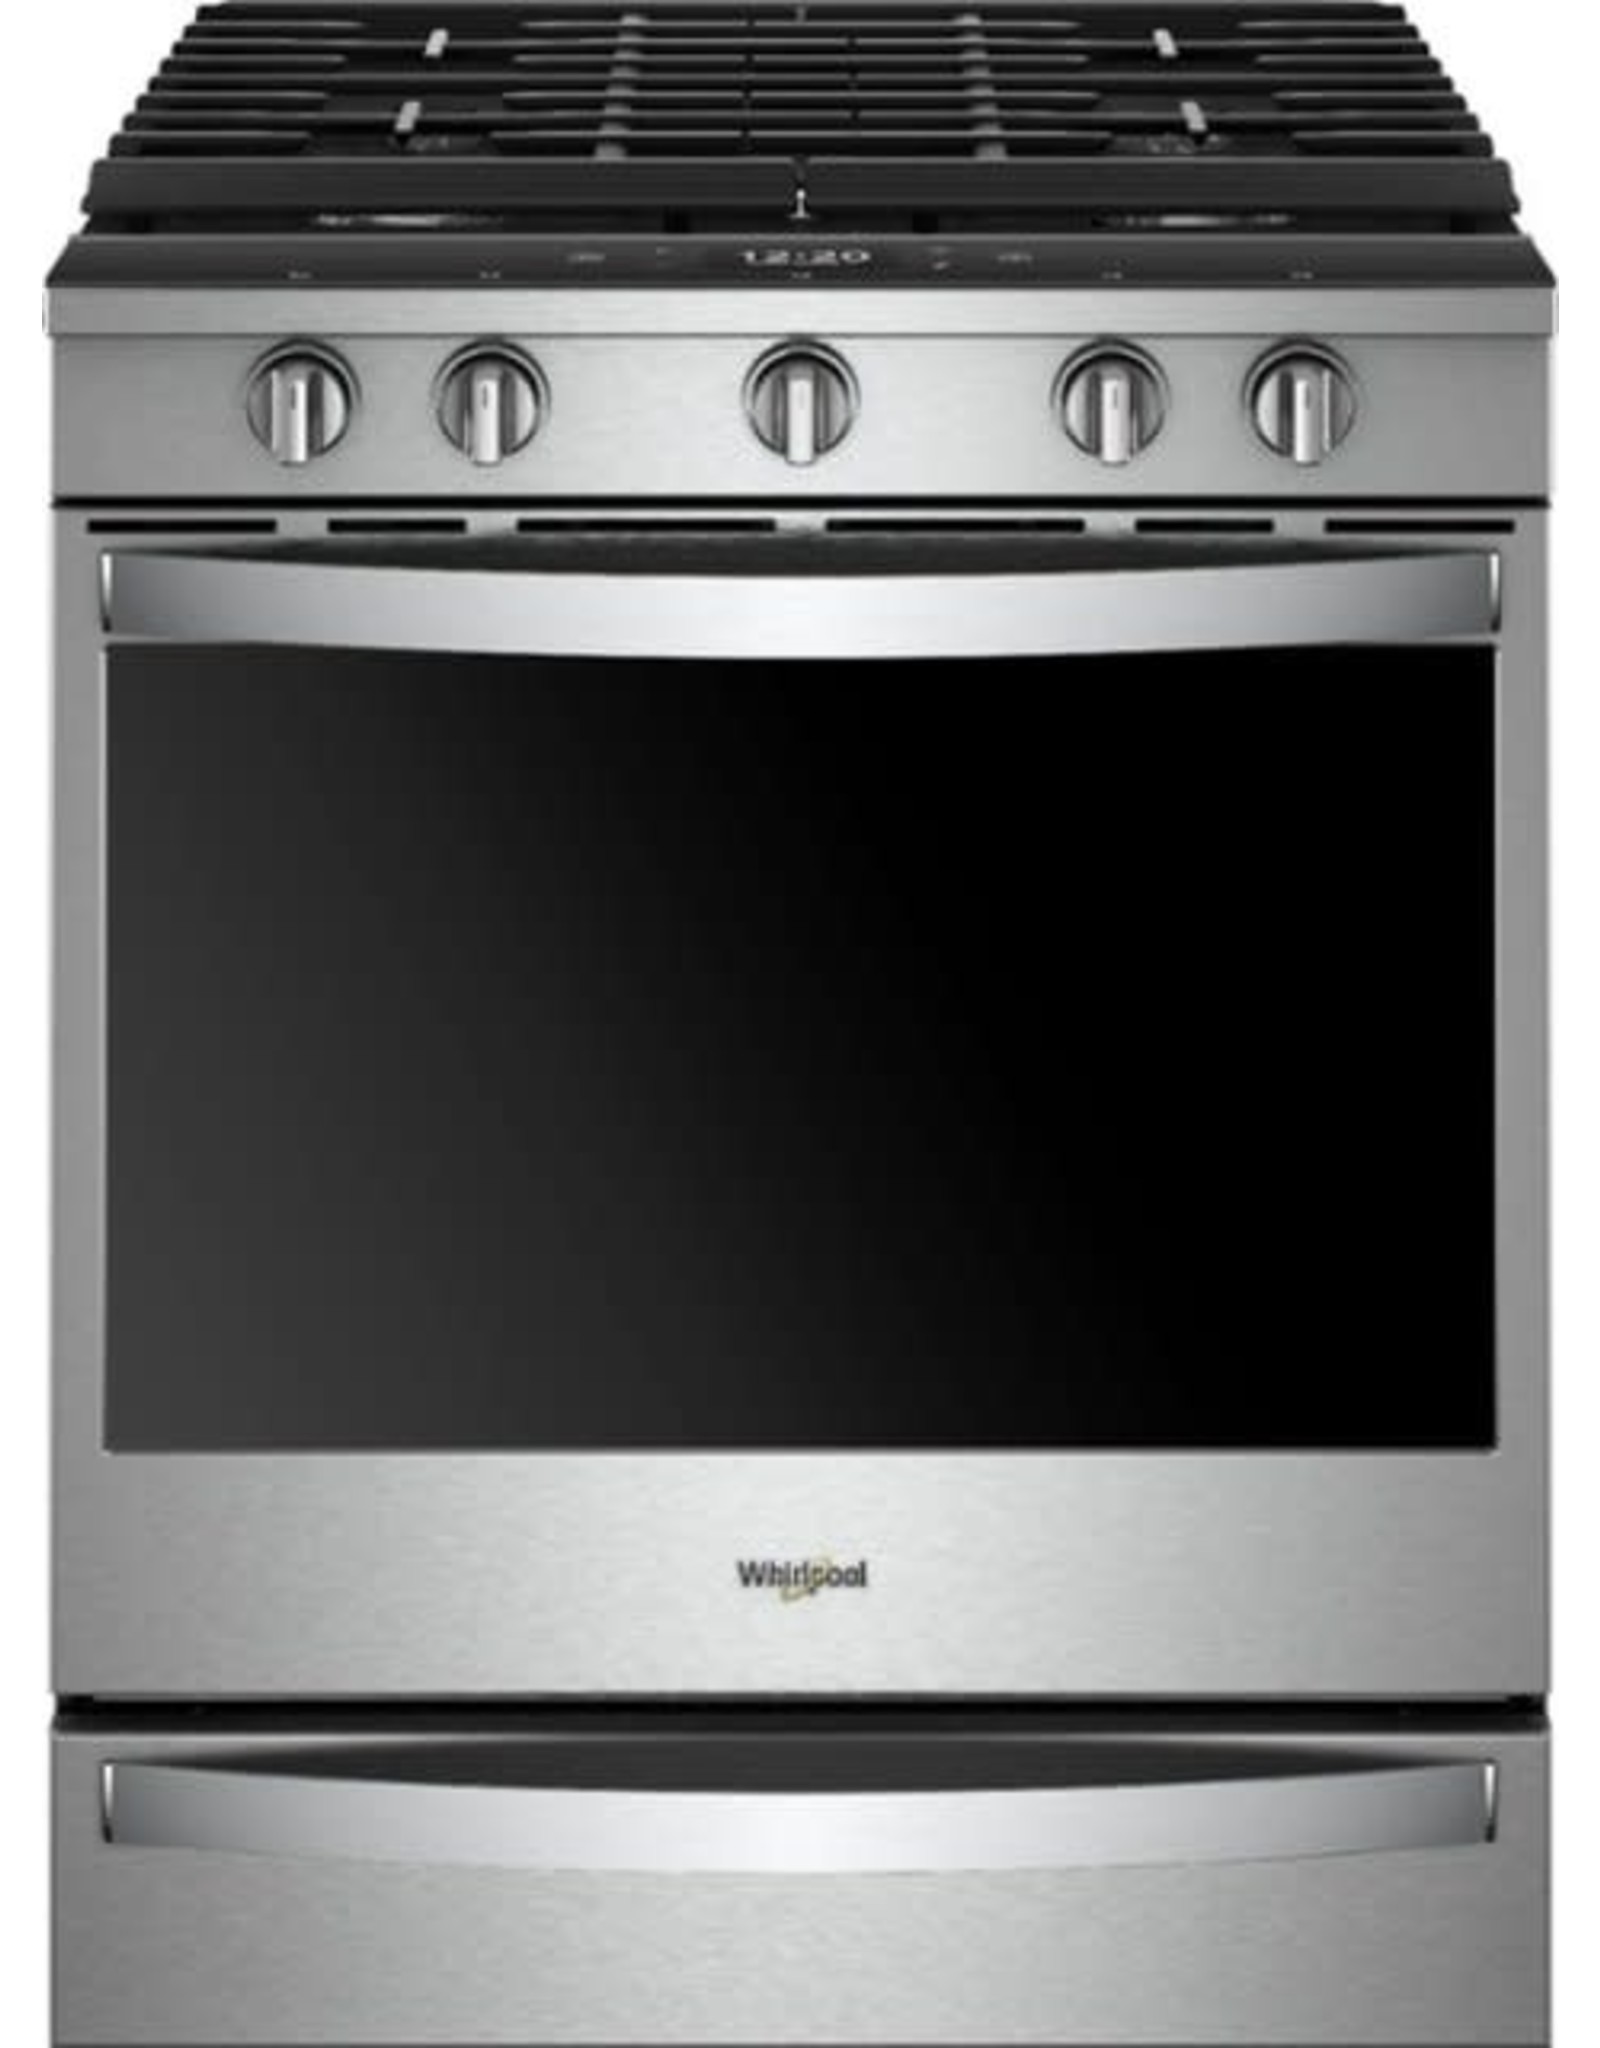 WEG750H0HZ WHR Whirlpool - 5.8 Cu. Ft. Slide-In Gas Convection Range with Self-Cleaning with Air Fry with Connection - Stainless steel